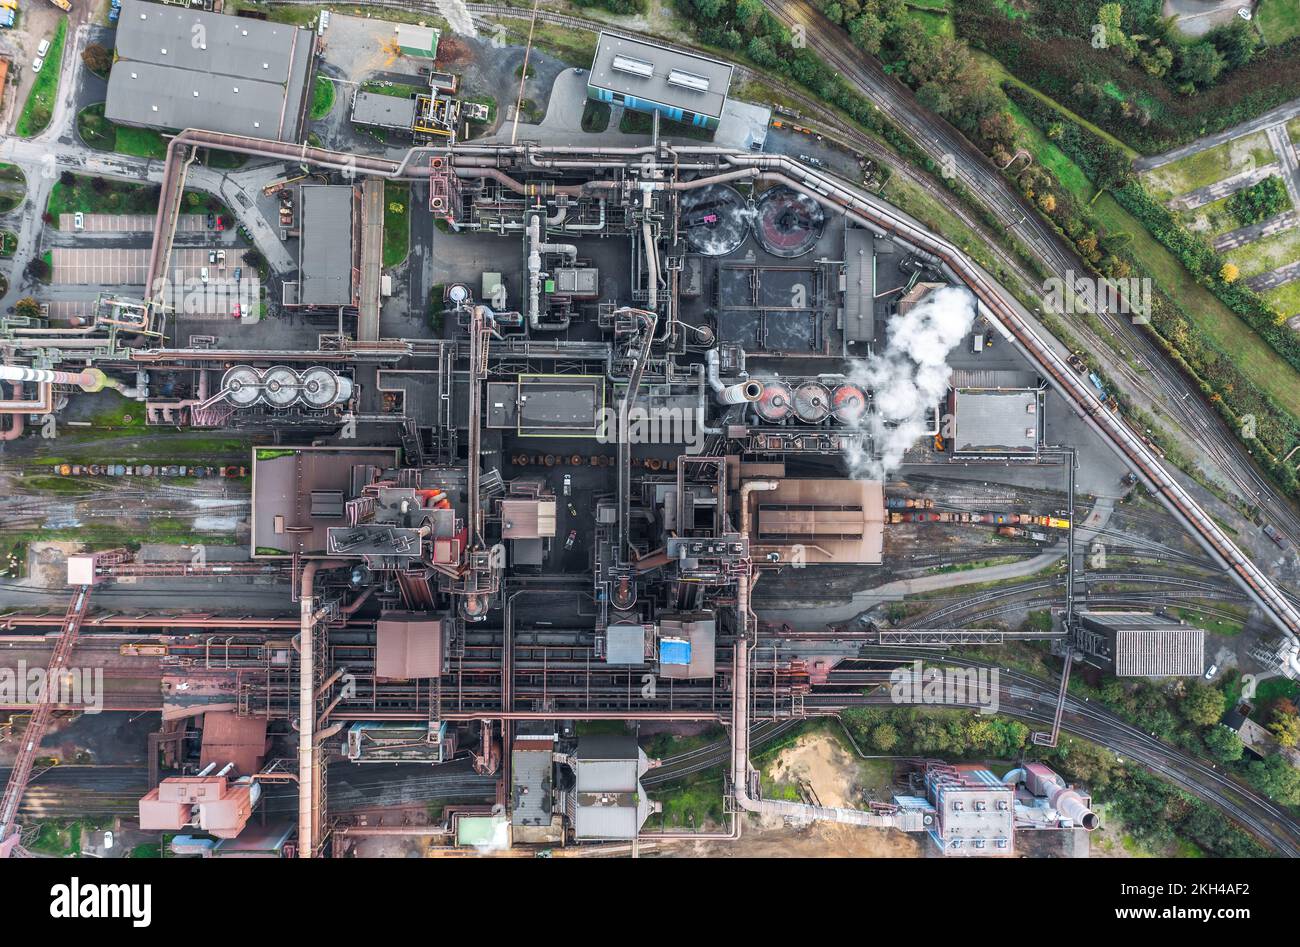 Duisburg, Germany, Industry of Ruhr: Aerial view directly above the industrial blast furnace of ThyssenKrupp steel production plant Stock Photo